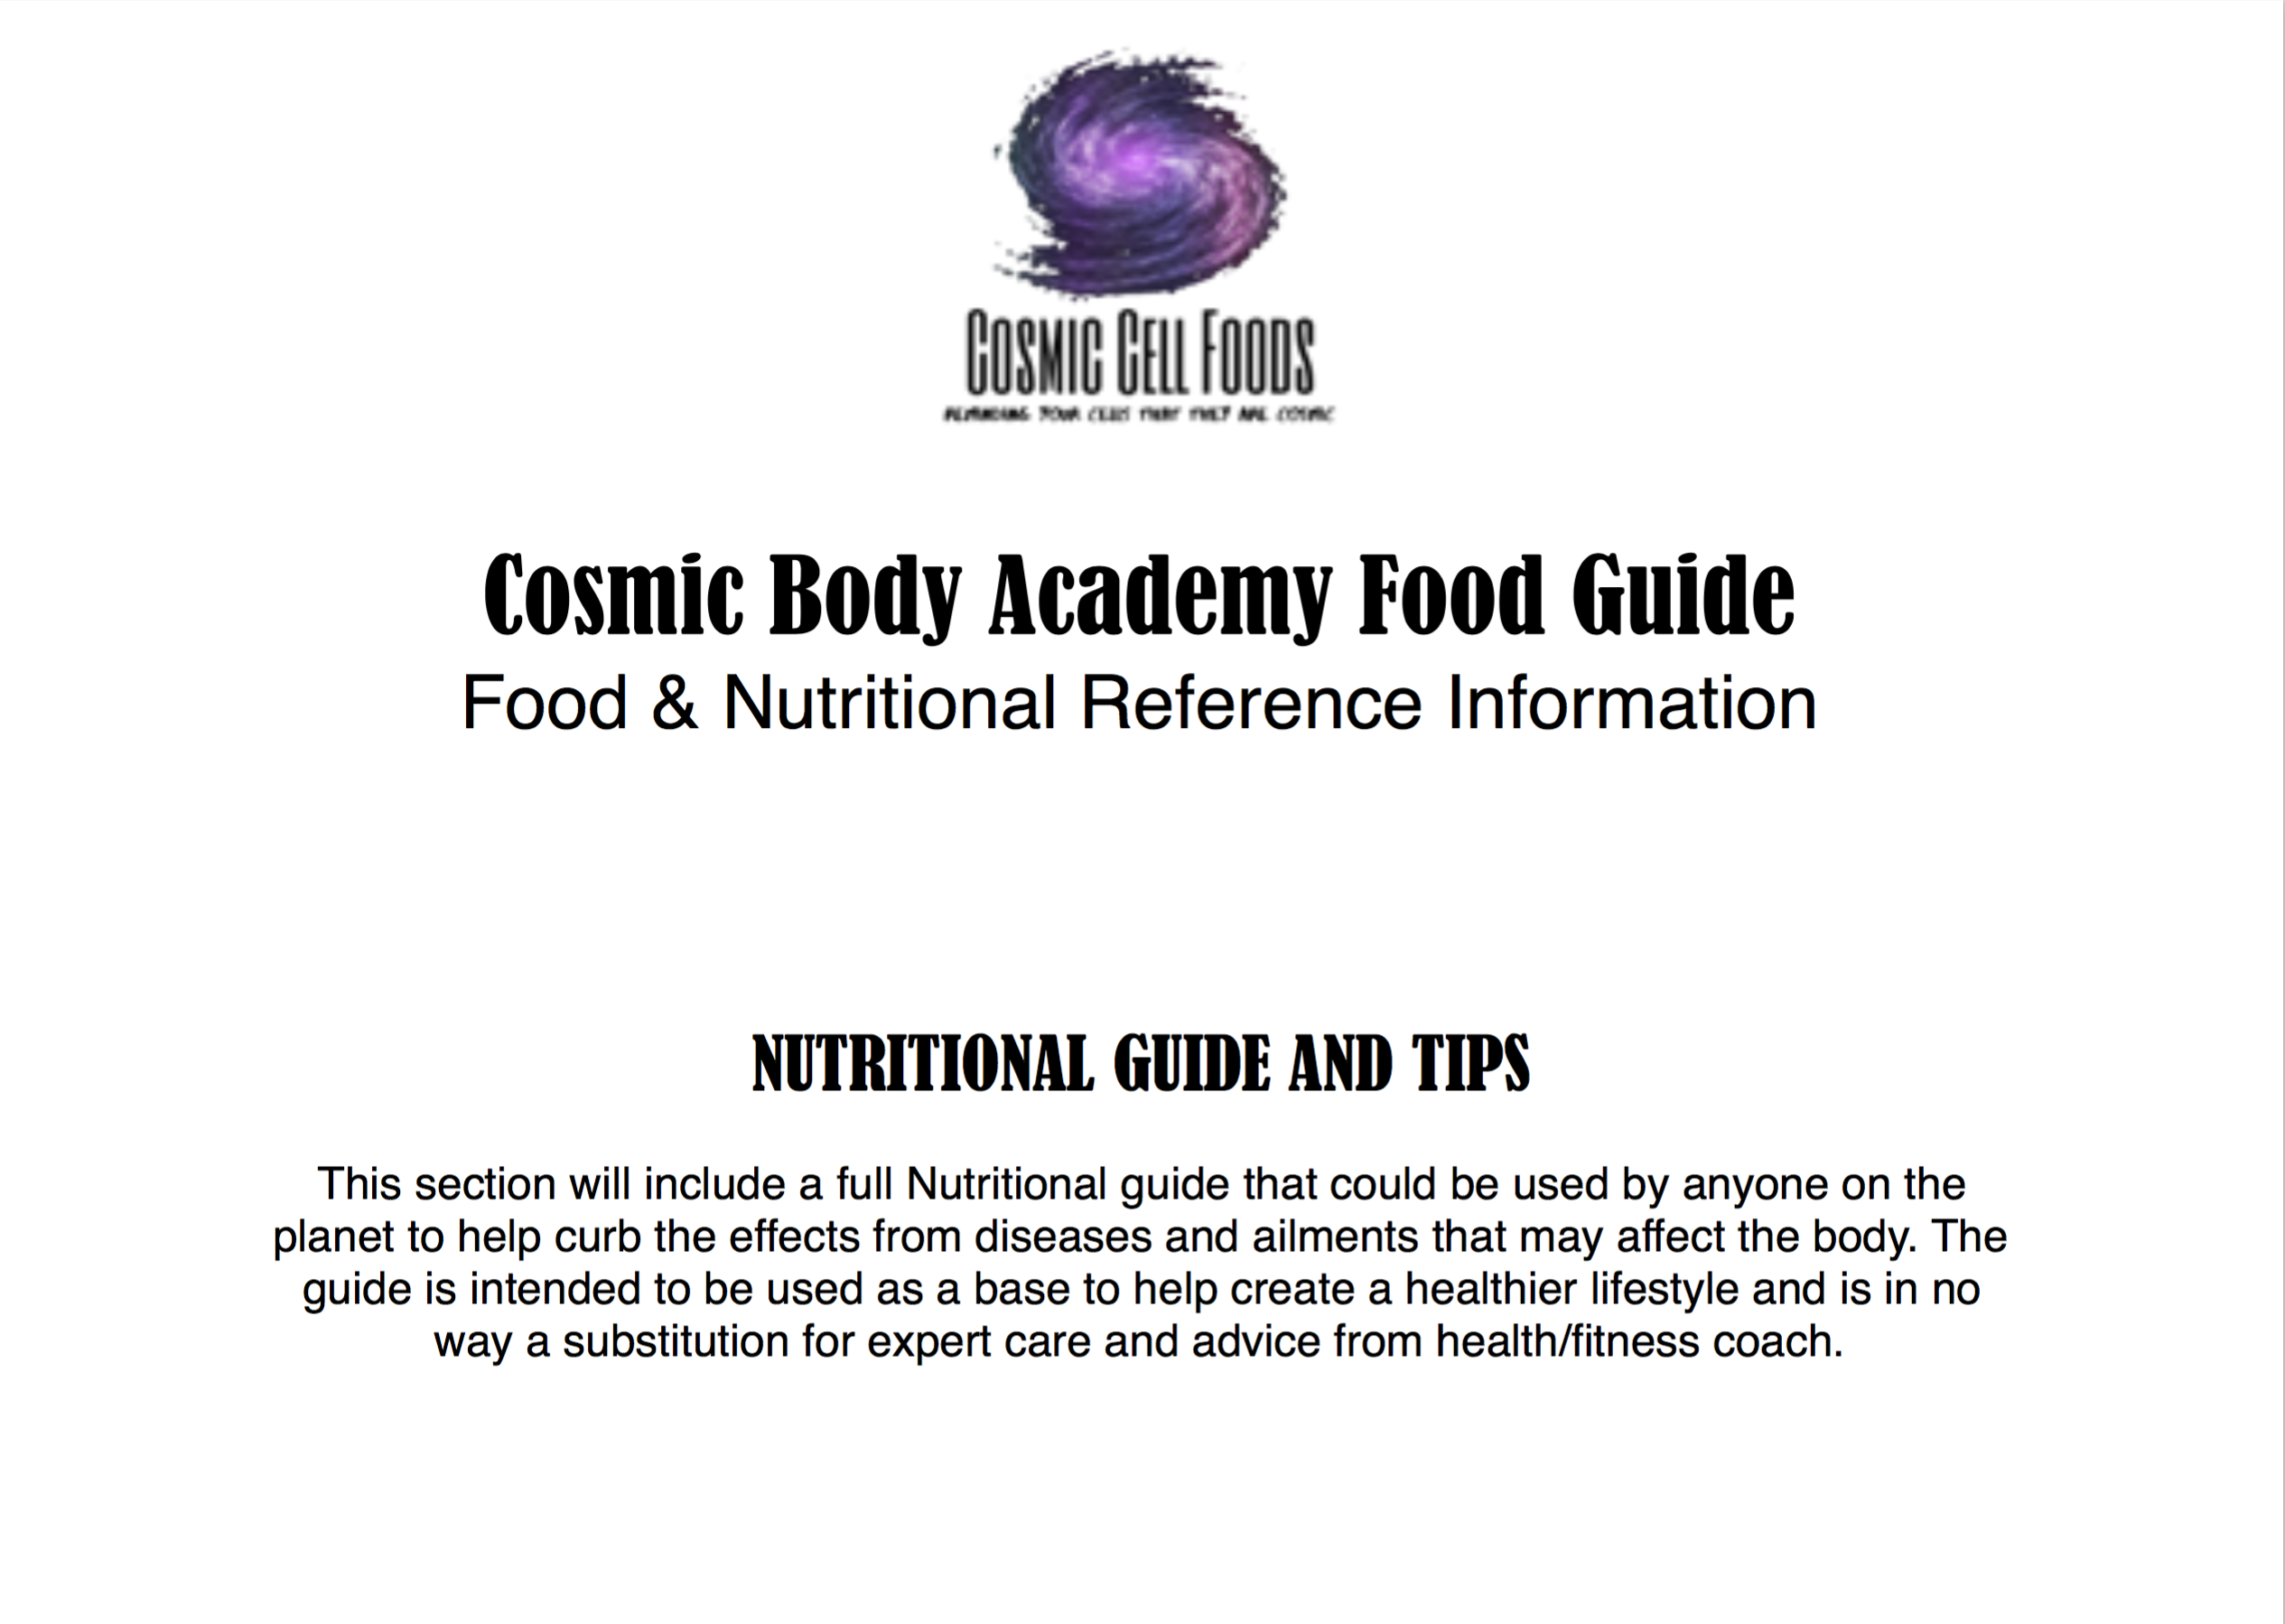  OB Bl Fong FUARDARE Ow LT el T AN e Cosmic Body Academy Food Guide Food Nutritional Reference Information NUTRITIONAL GUIDE AND TIPS This section will include a full Nutritional guide that could be used by anyone on the planet to help curb the effects from diseases and ailments that may affect the body. The guide is intended to be used as a base to help create a healthier lifestyle and is in no way a substitution for expert care and advice from healthfitness coach. 